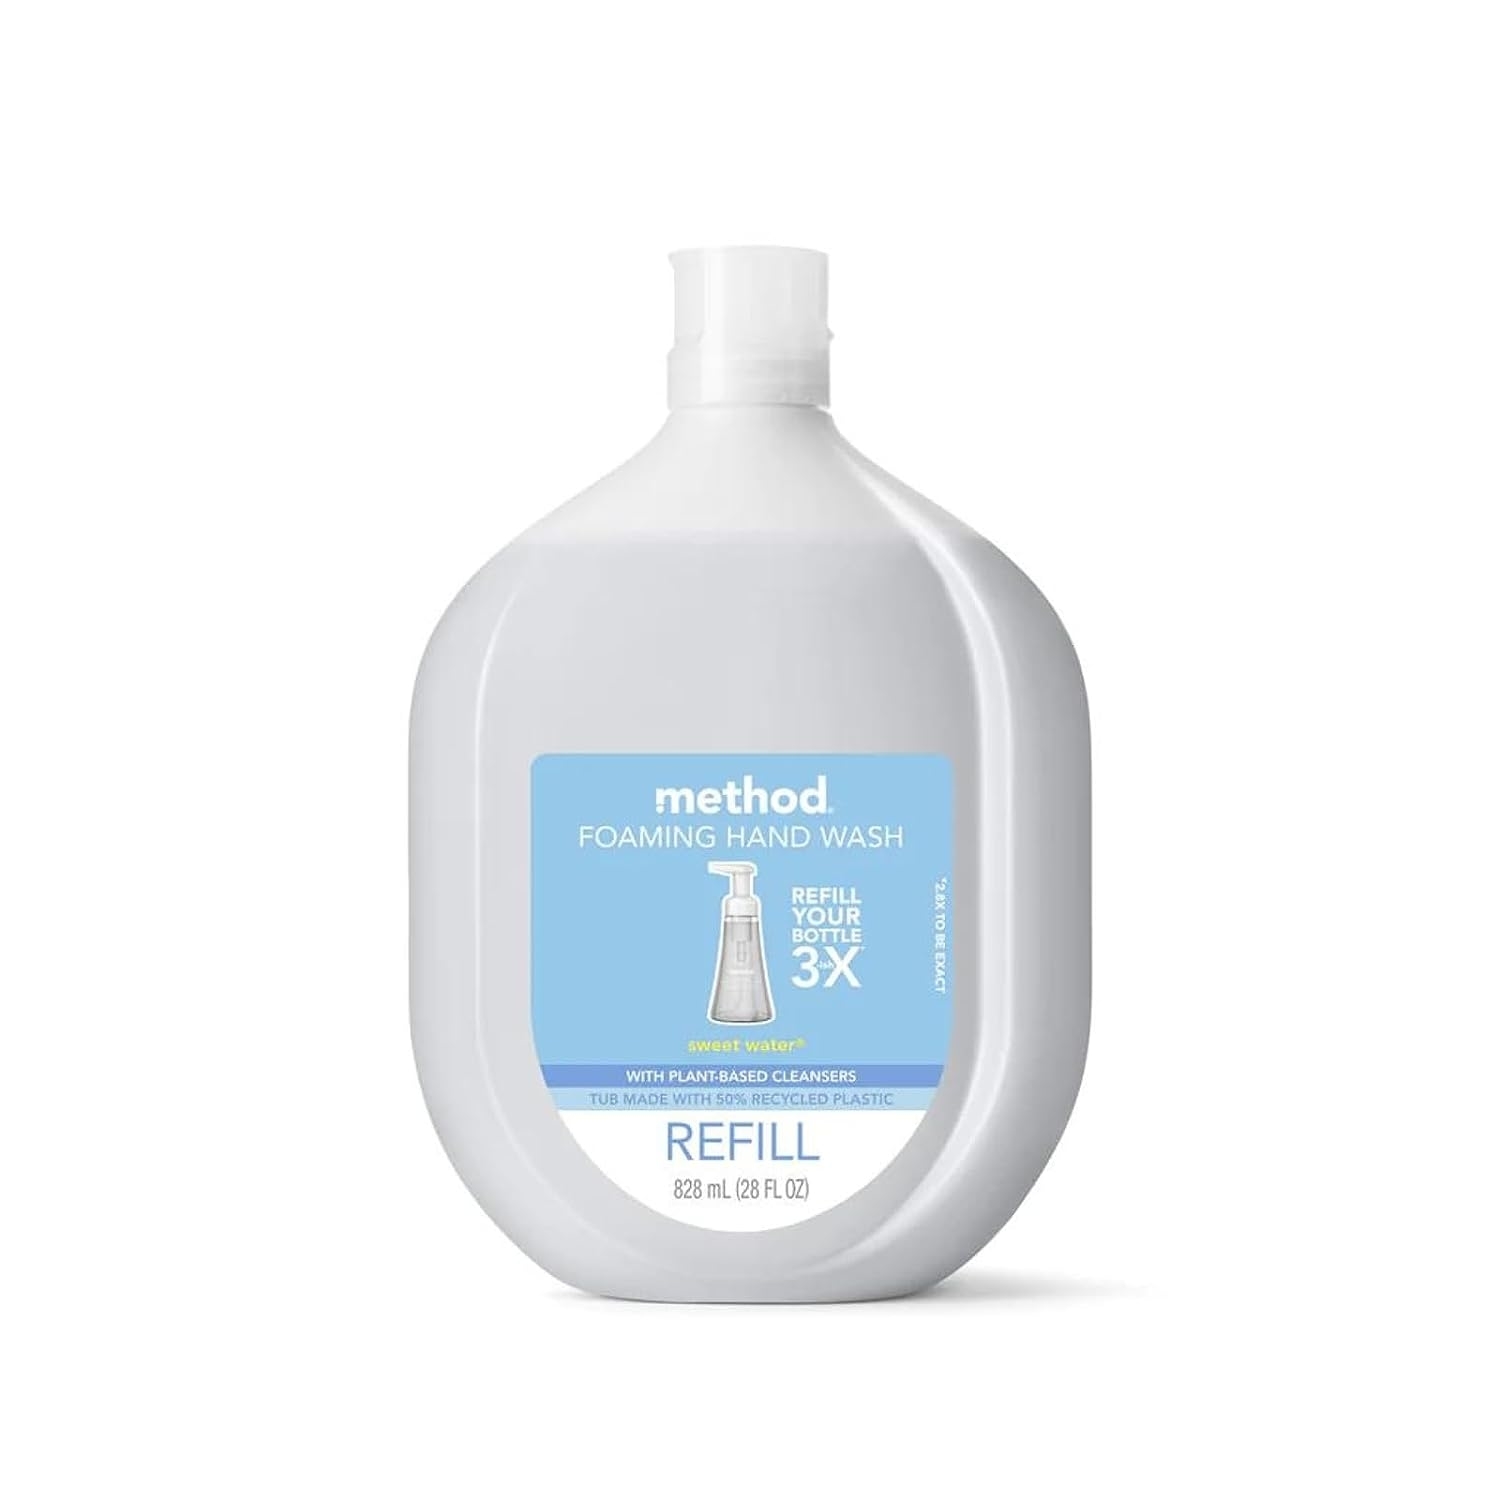 refill of hand soap